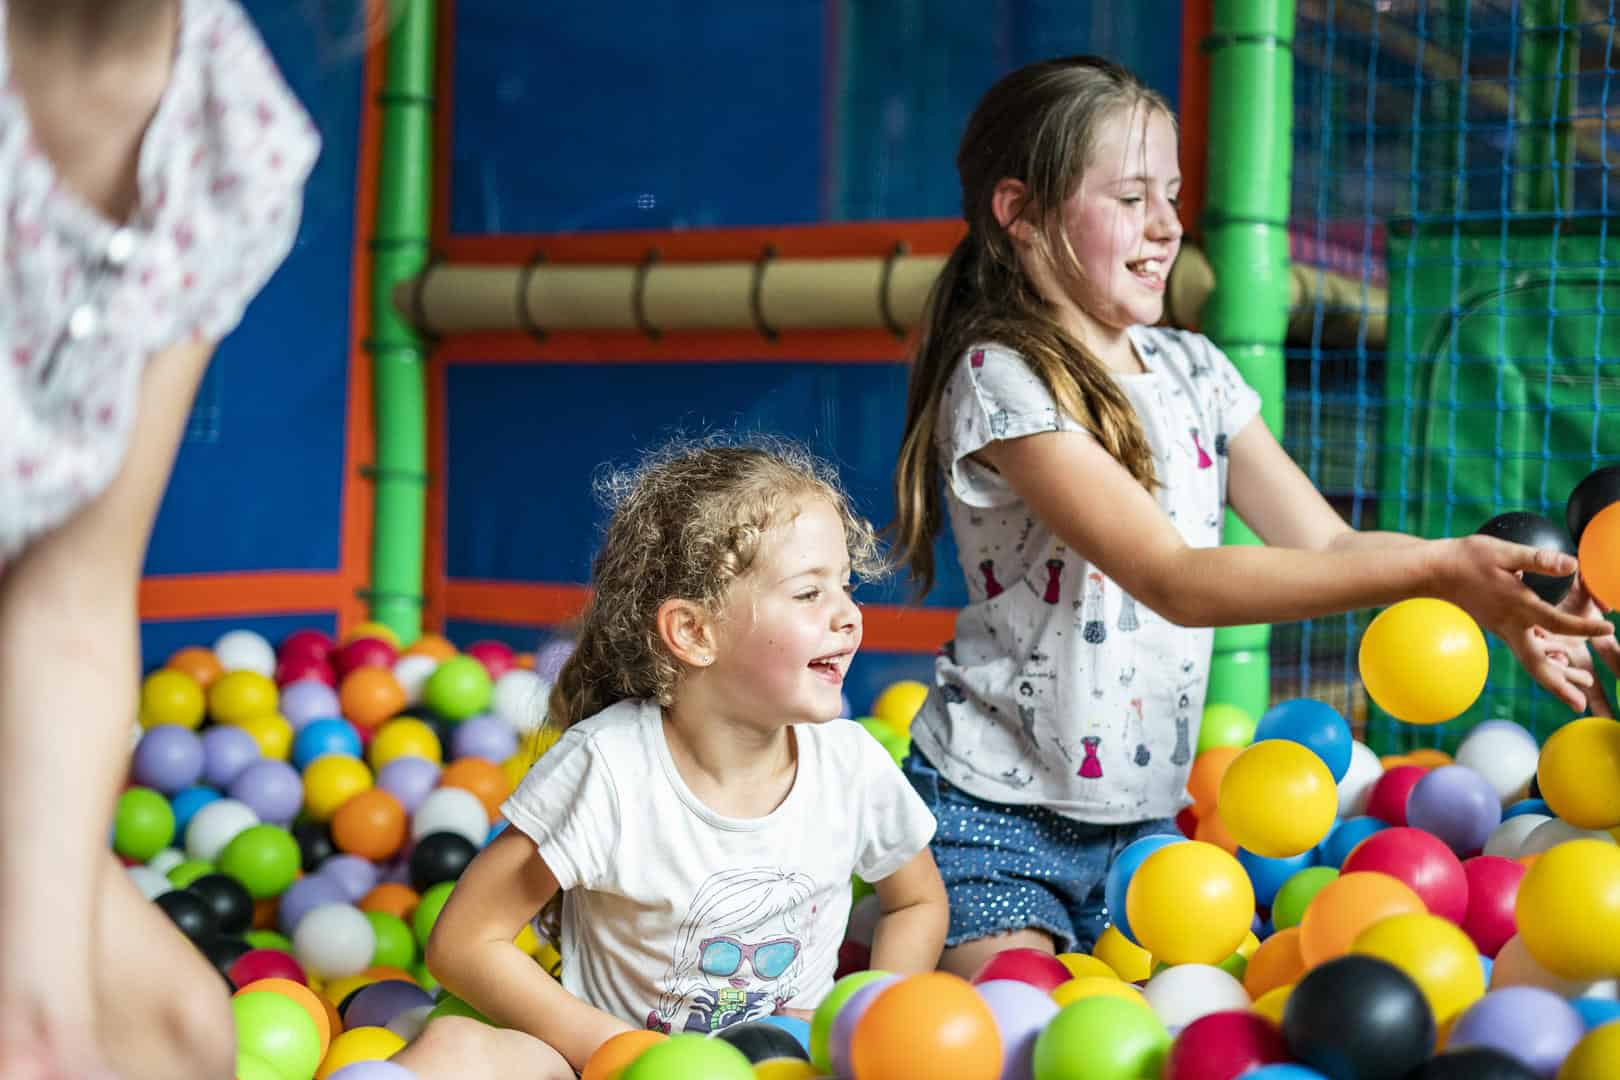 Young girls enjoying the ball pool, surrounded by plastic balls of various colours